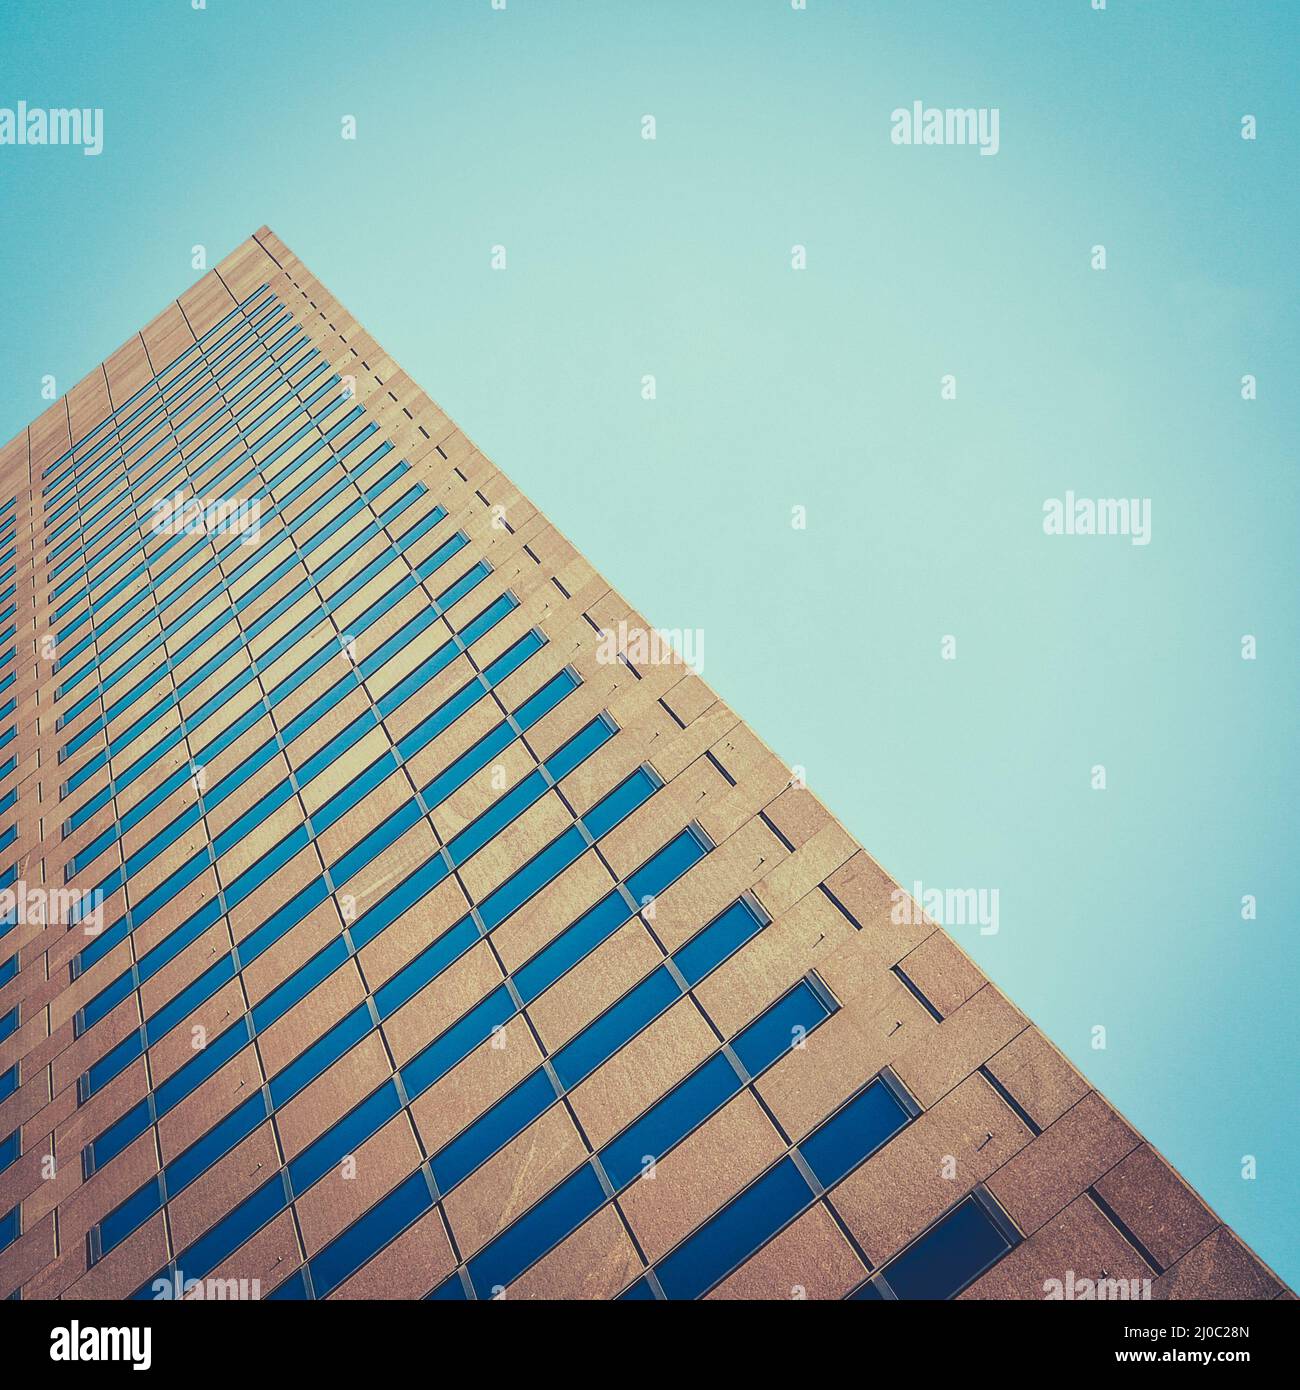 Diagonal Architecture Abstract Stock Photo